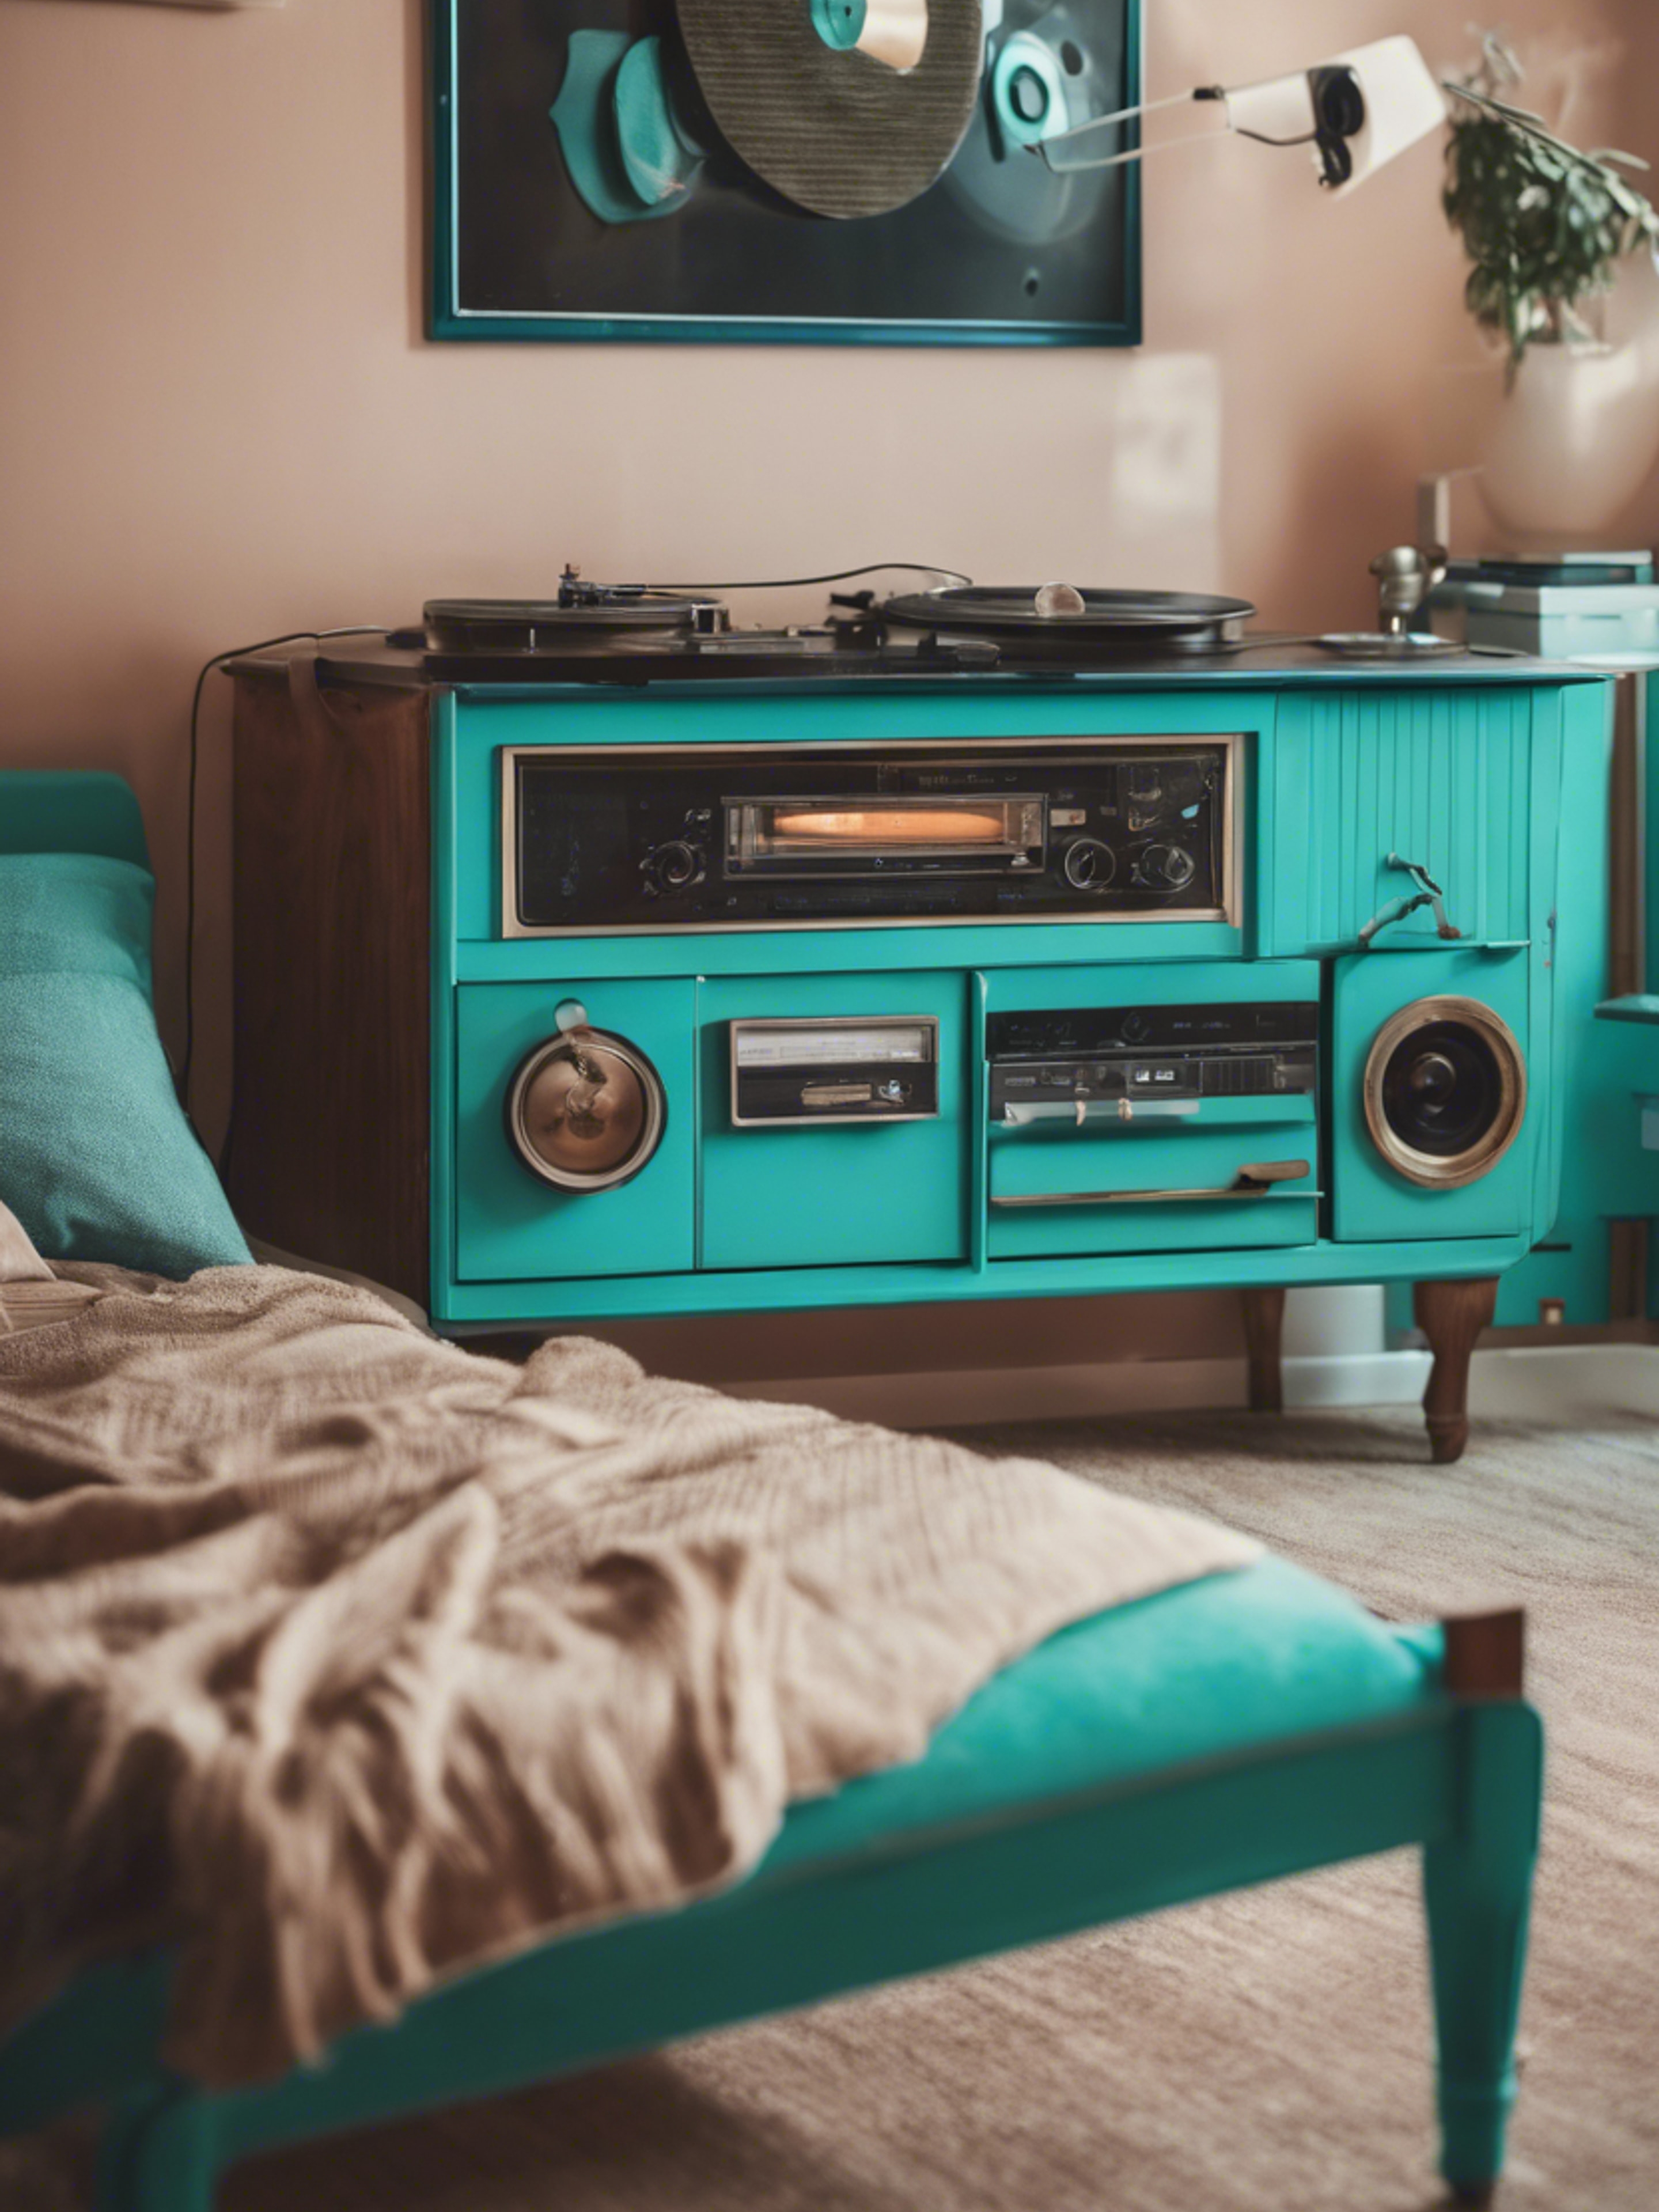 A turquoise retro bedroom with vintage furniture and record players Ფონი[9d05420ae9754c17b49a]